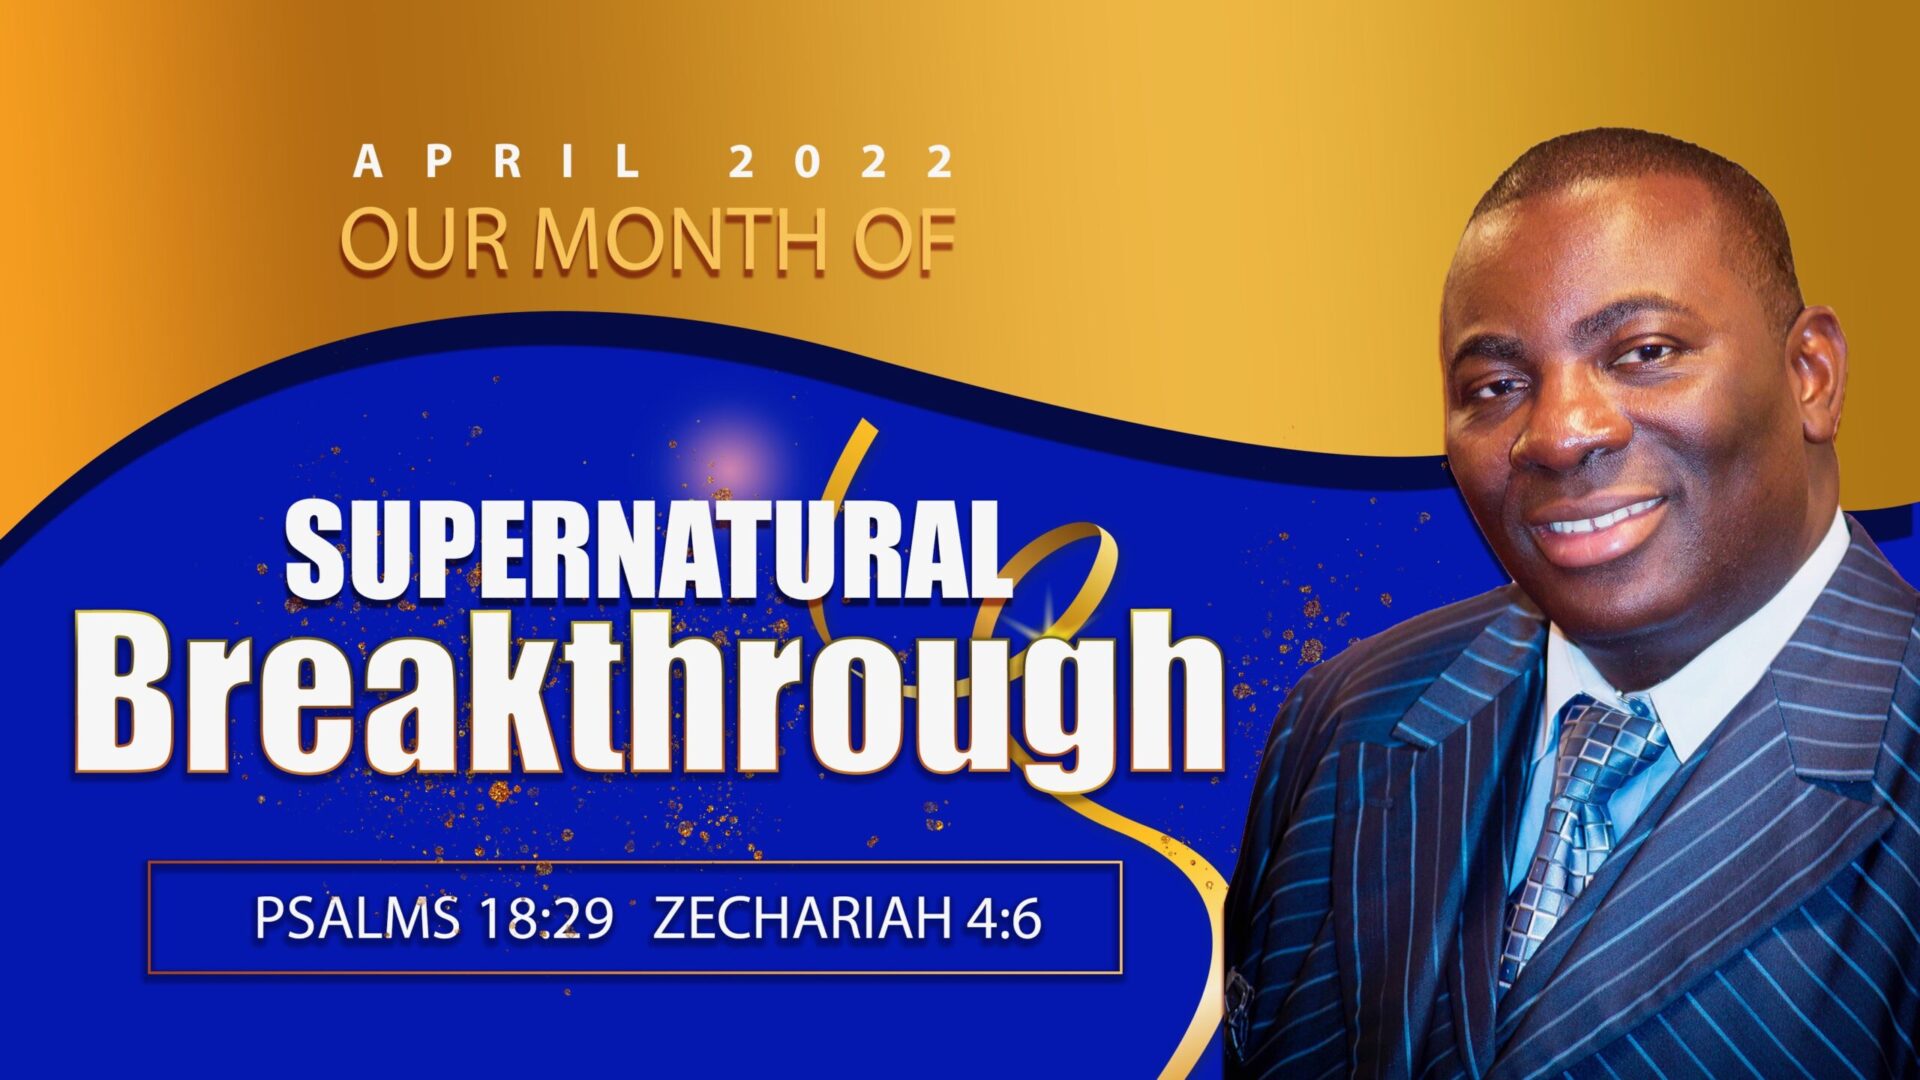 You are currently viewing Our Month of Supernatural Breakthrough